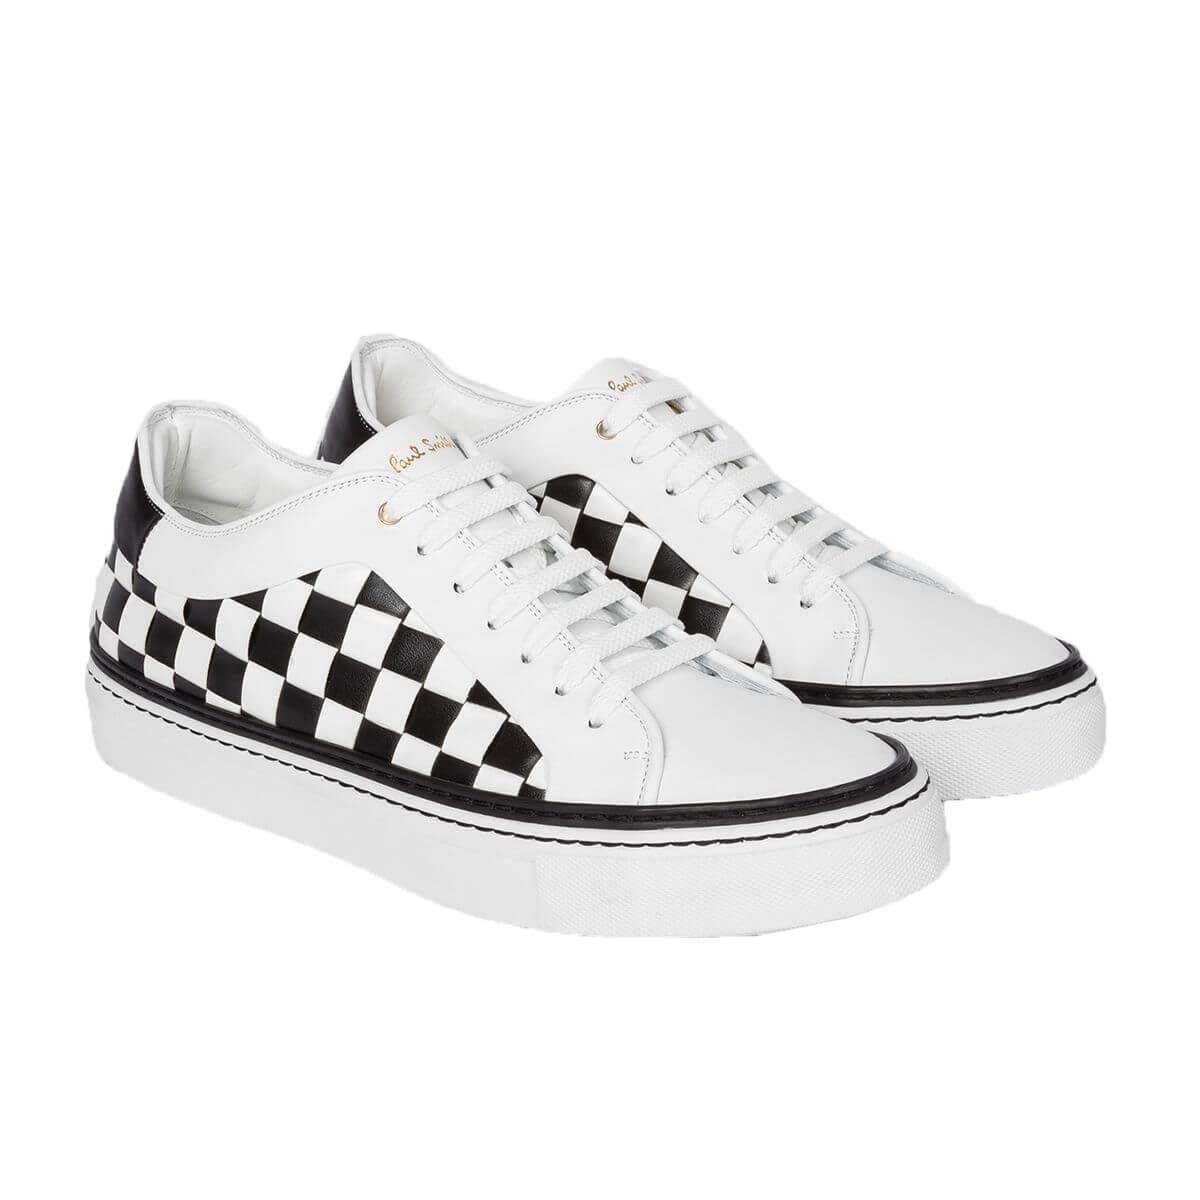 White Leather Monochrome Check Pattern 'Basso' Trainers